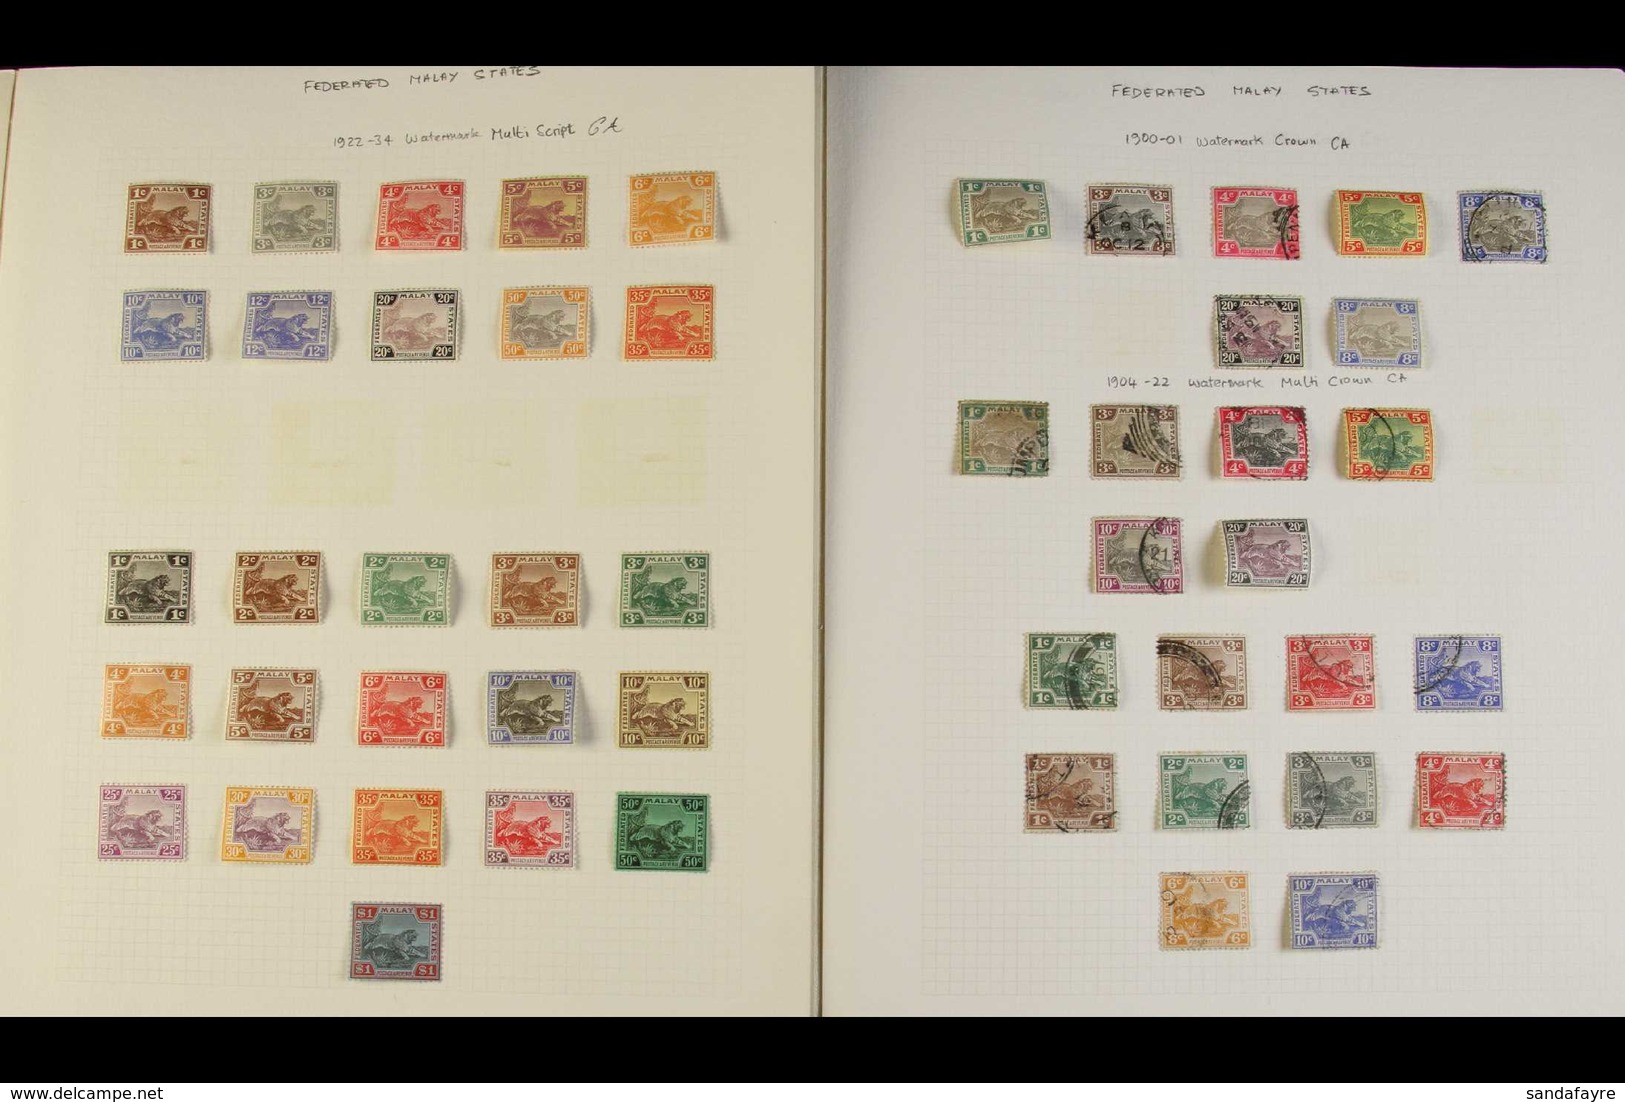 FEDERATED MALAY STATES 1900-34 All Different Mint Or Used Collection On Album Pages, Includes 1900-01 (wmk Crown CA) 1c  - Other & Unclassified